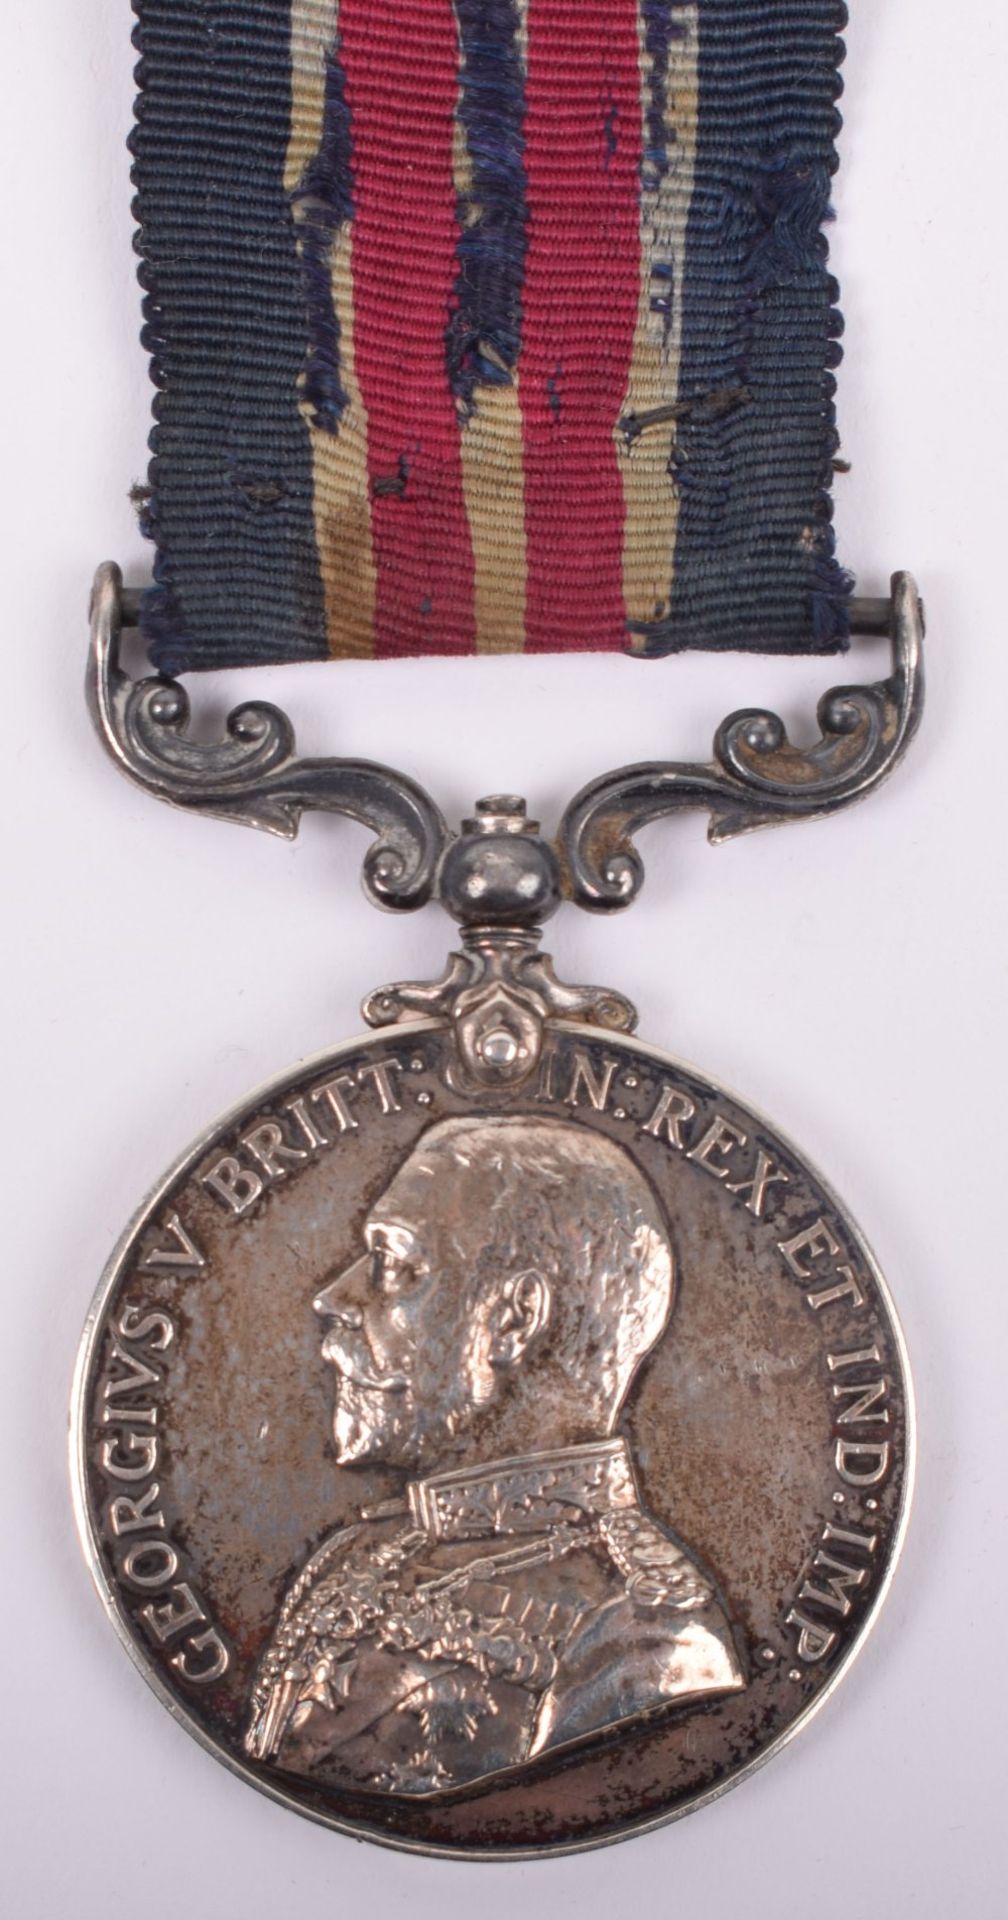 George V Military Medal (M.M) 219th Company Machine Gun Corps / East Surrey Regiment, Awarded for Ga - Image 2 of 7